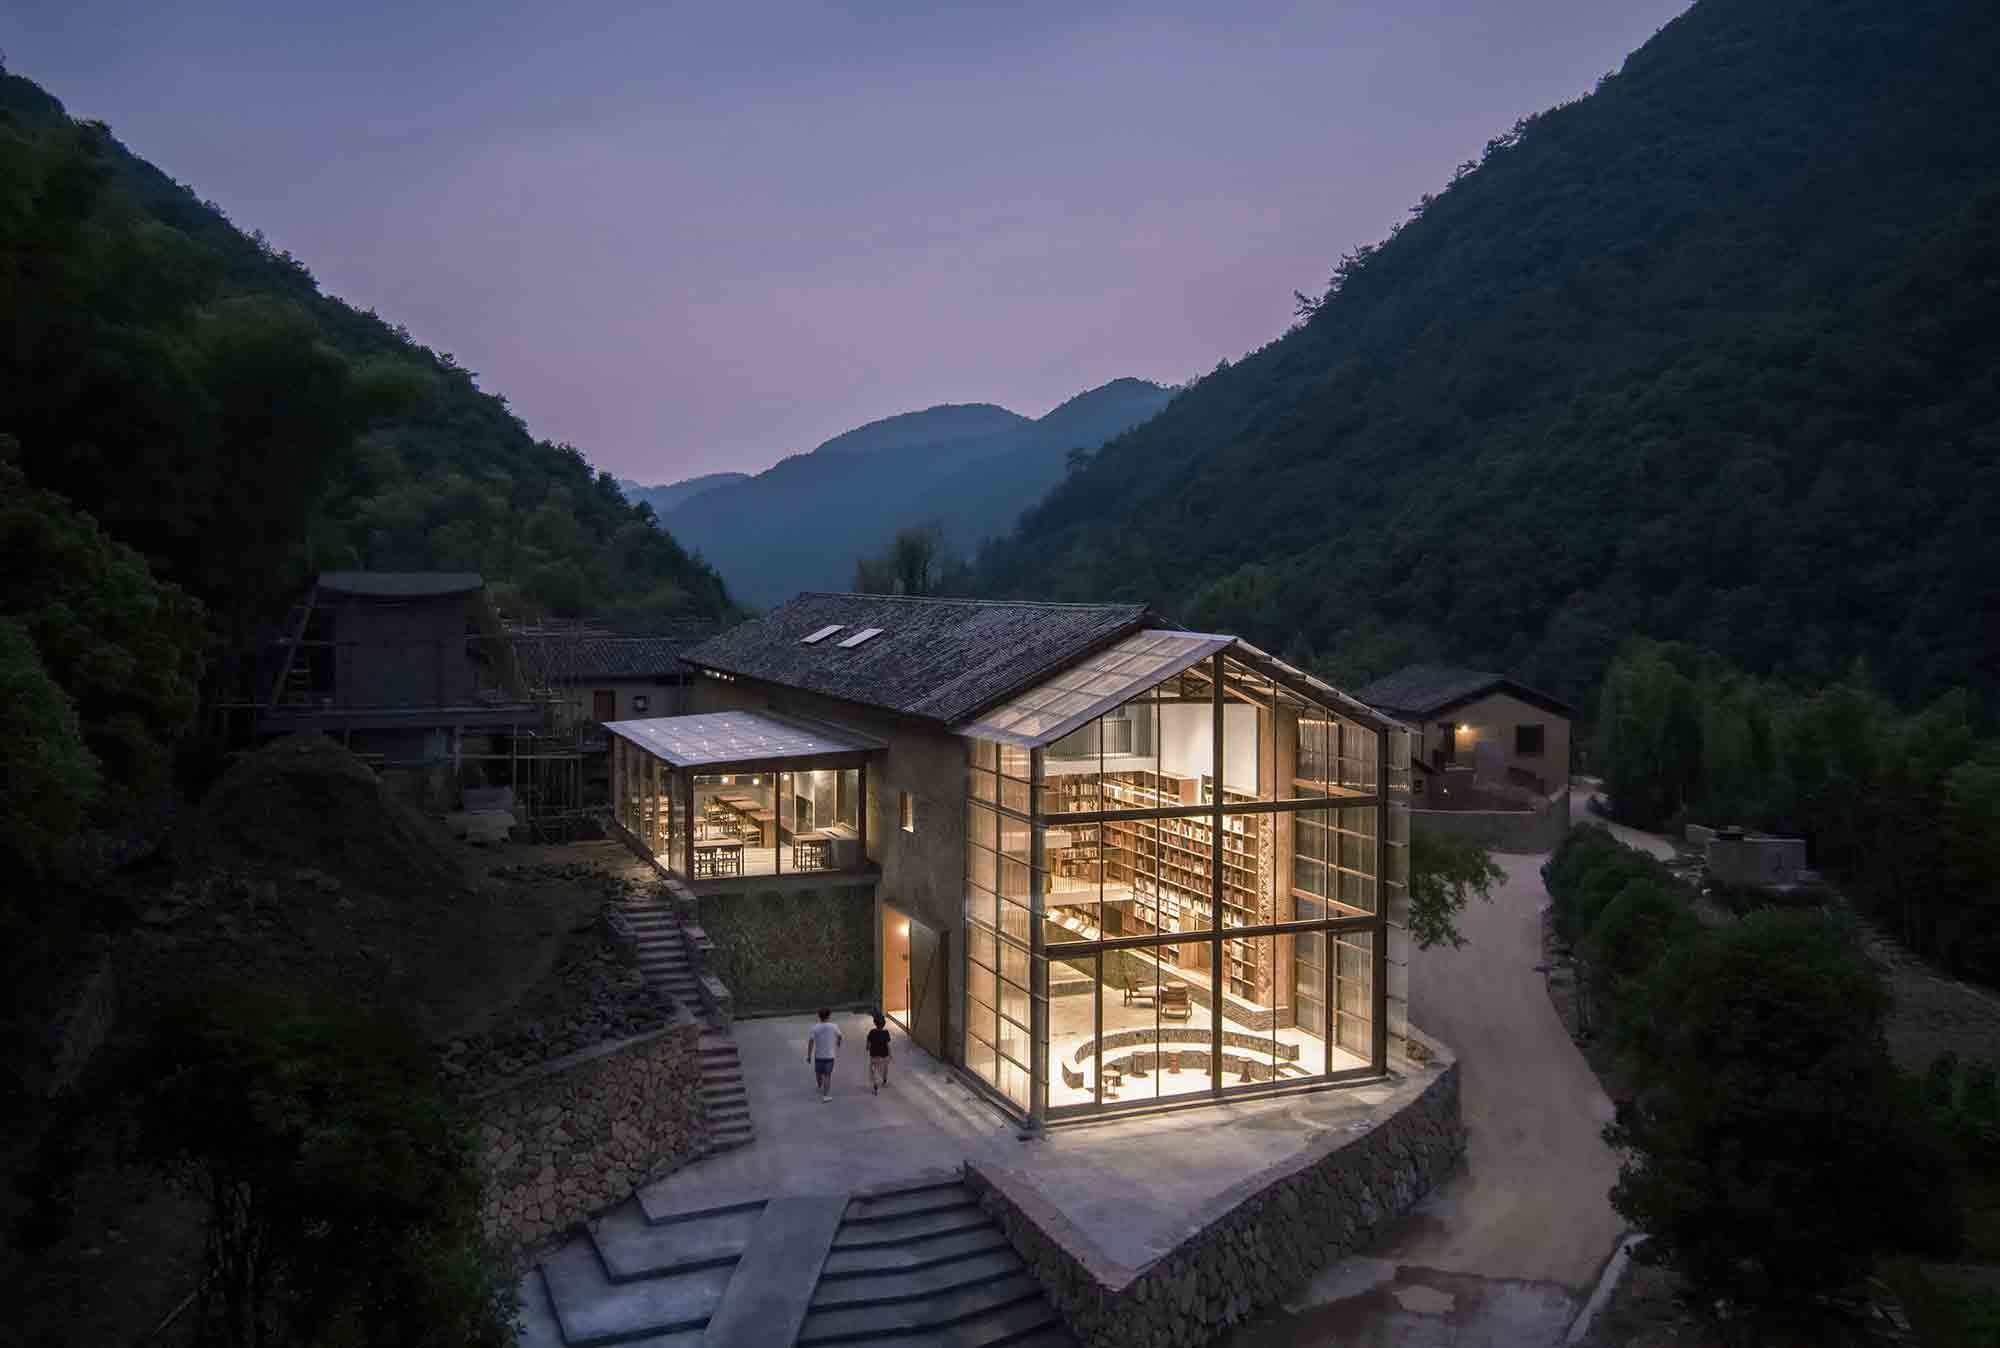 Capsule hotel in a rural library by Atelier tao+c